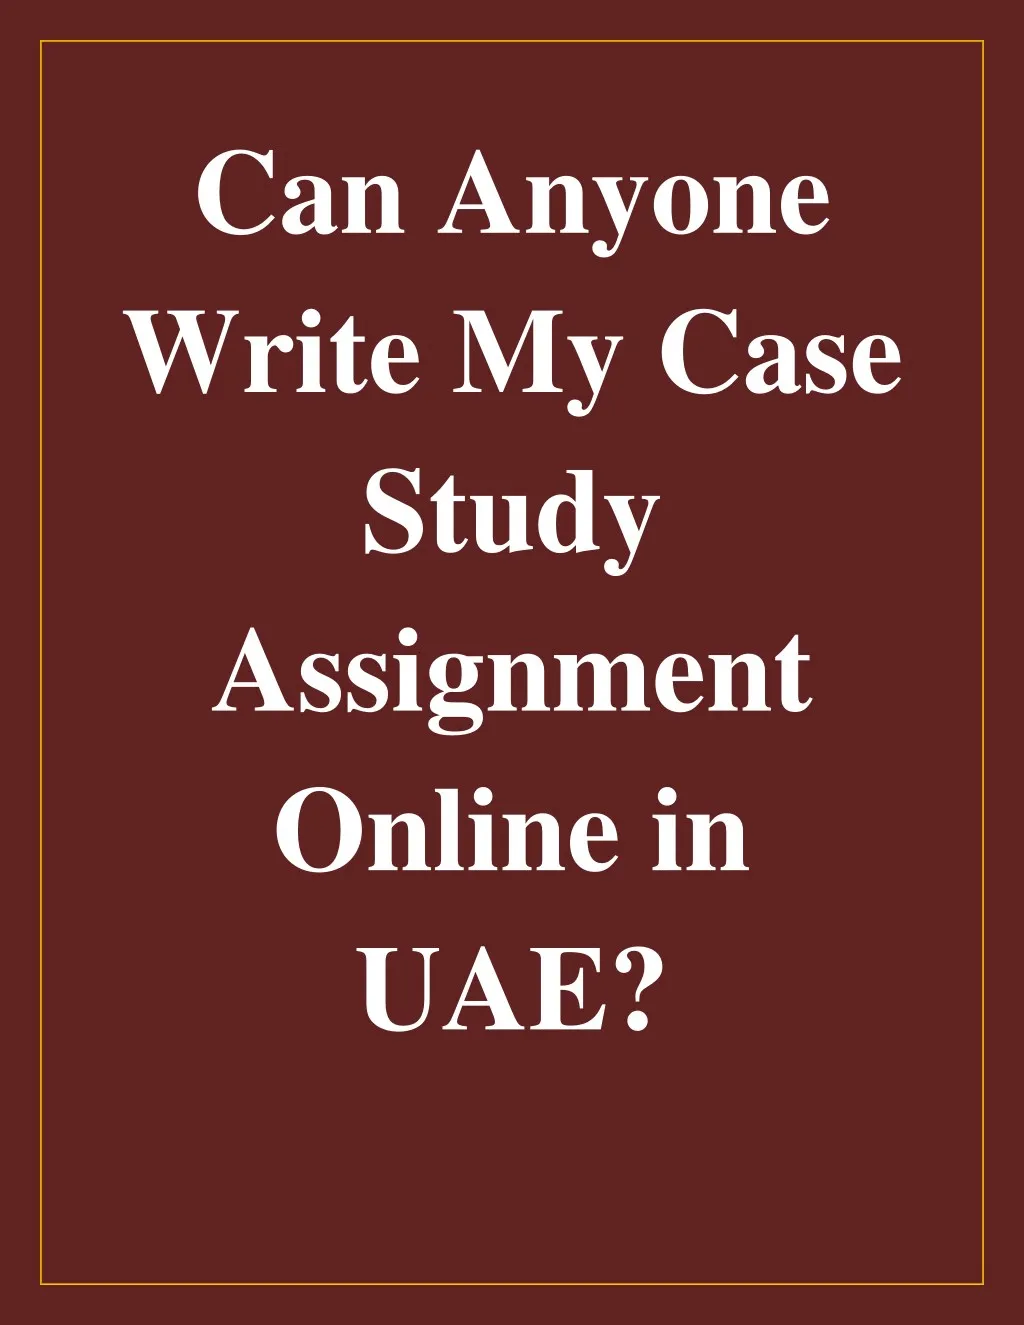 can anyone write my case study assignment online